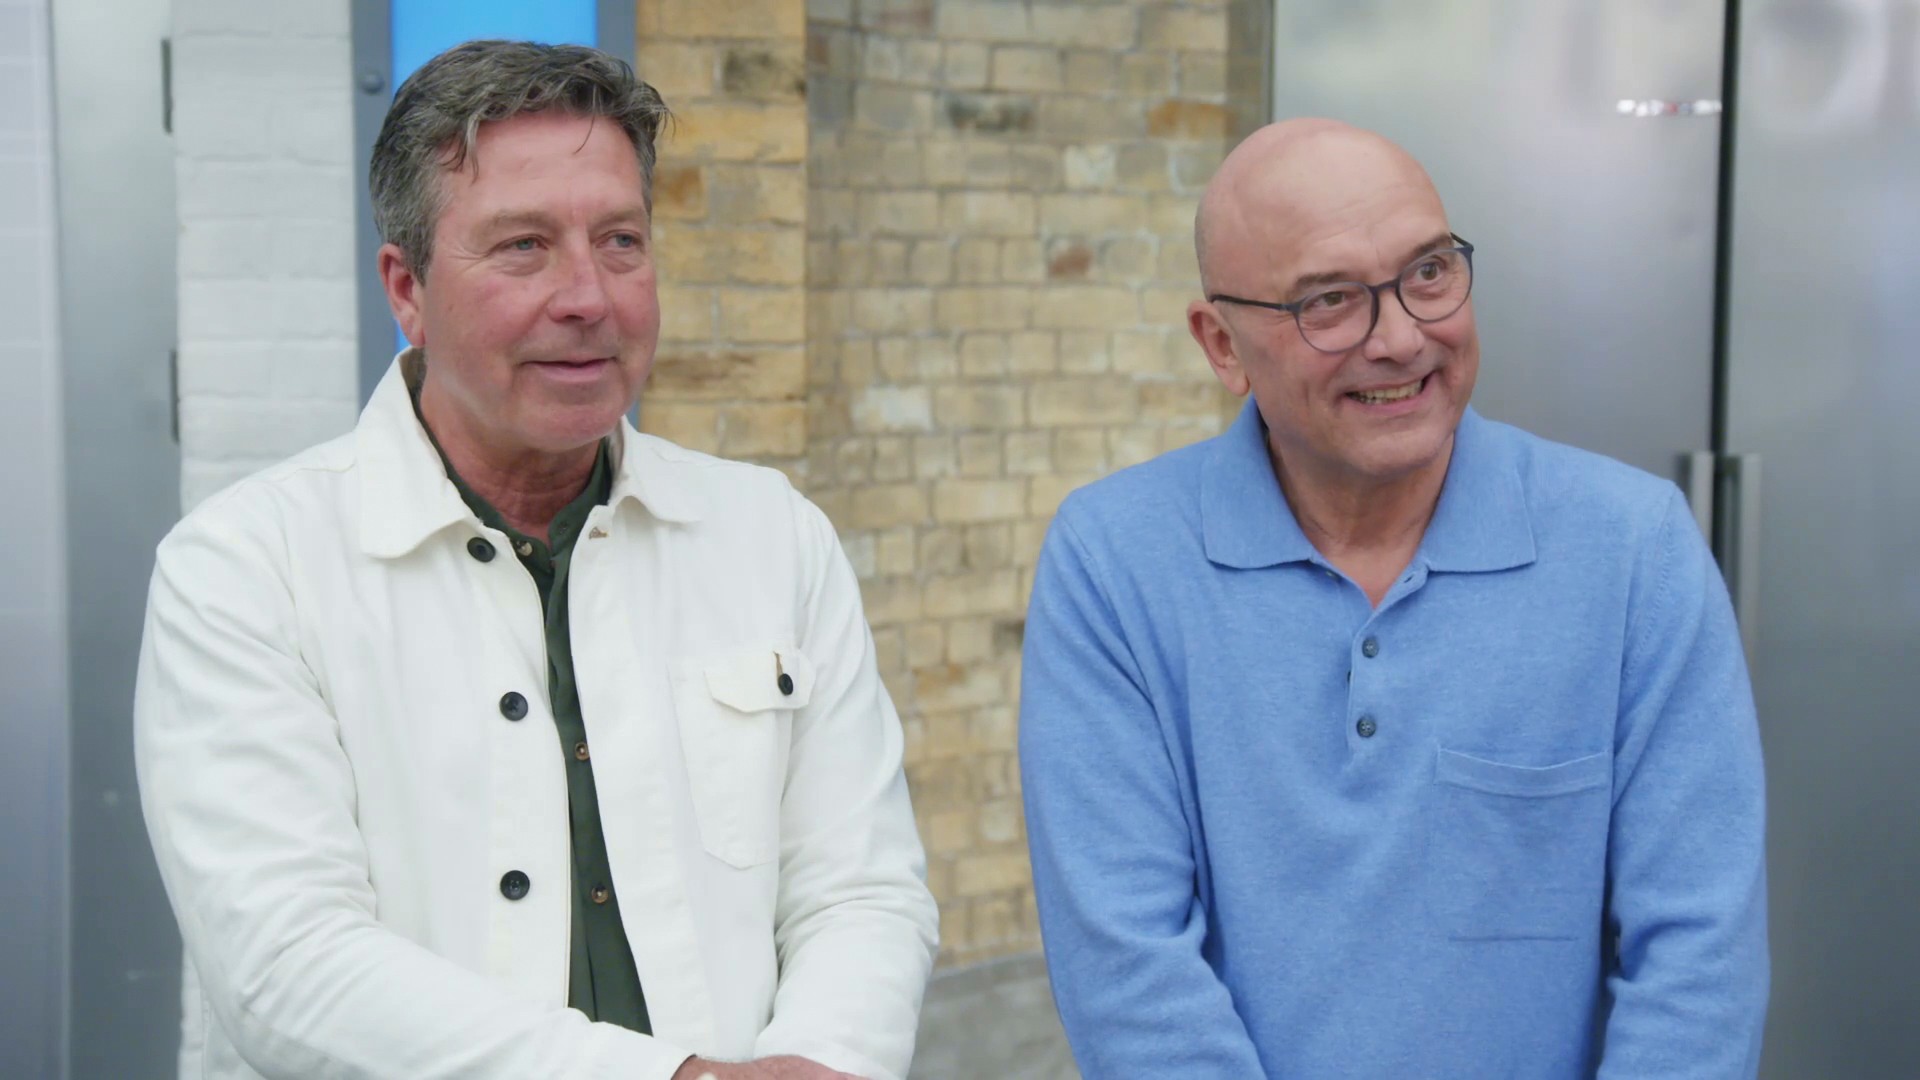 Celebrity Masterchef 2023: line-up of celeb chefs, air date | What to Watch